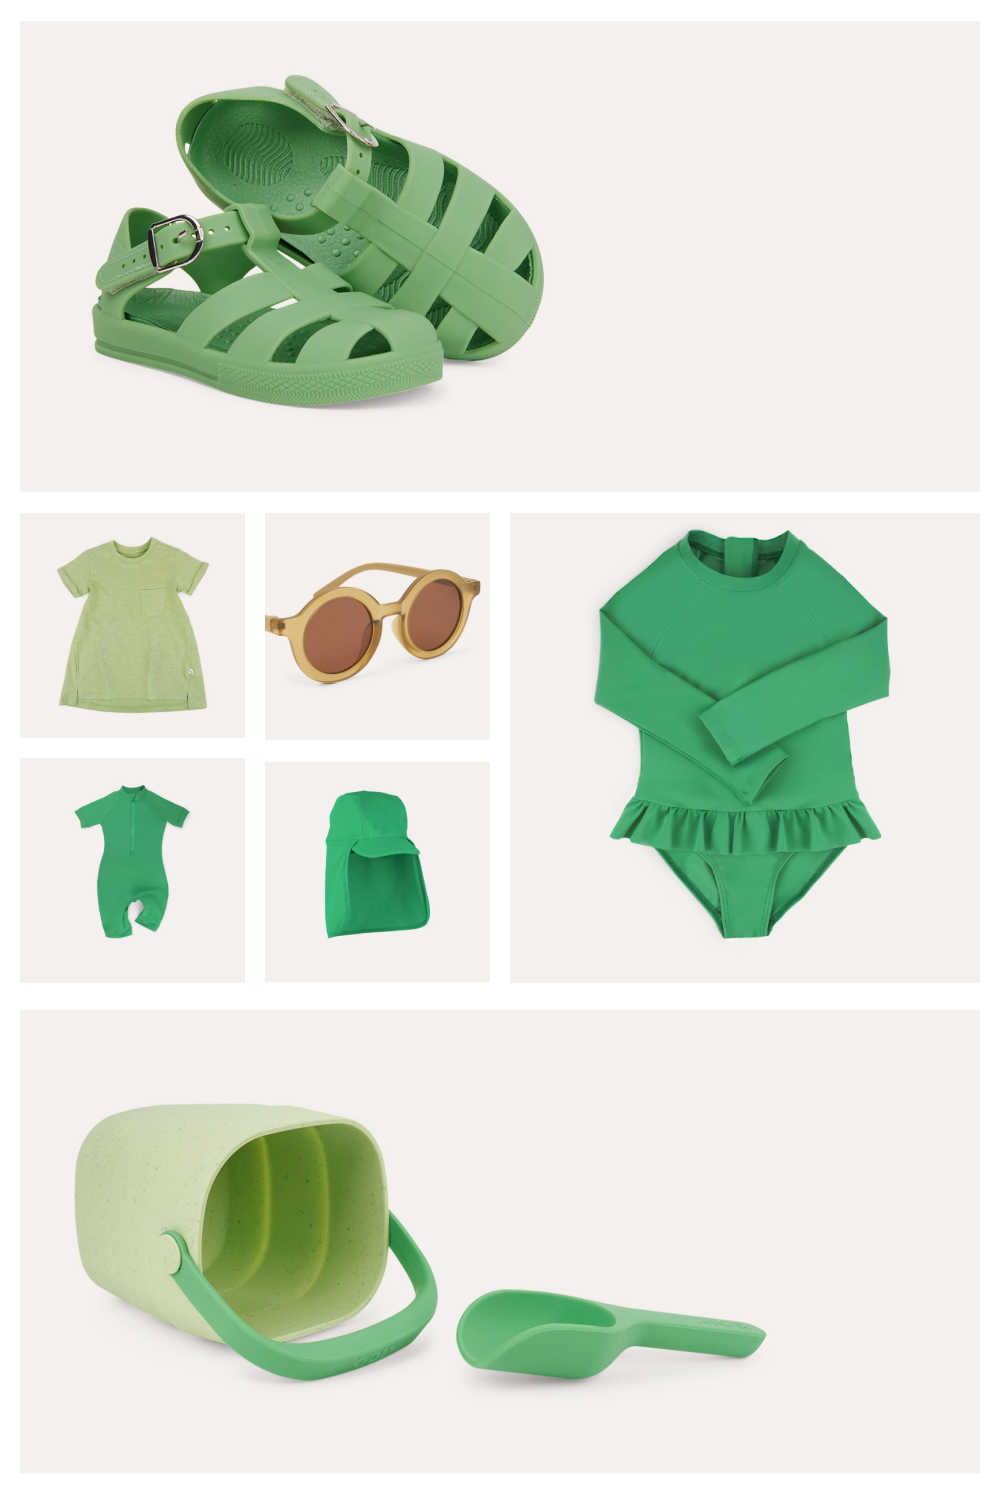 A selection of eco-friendly beach wear and beach toys, all in the colour green, from Kidly.